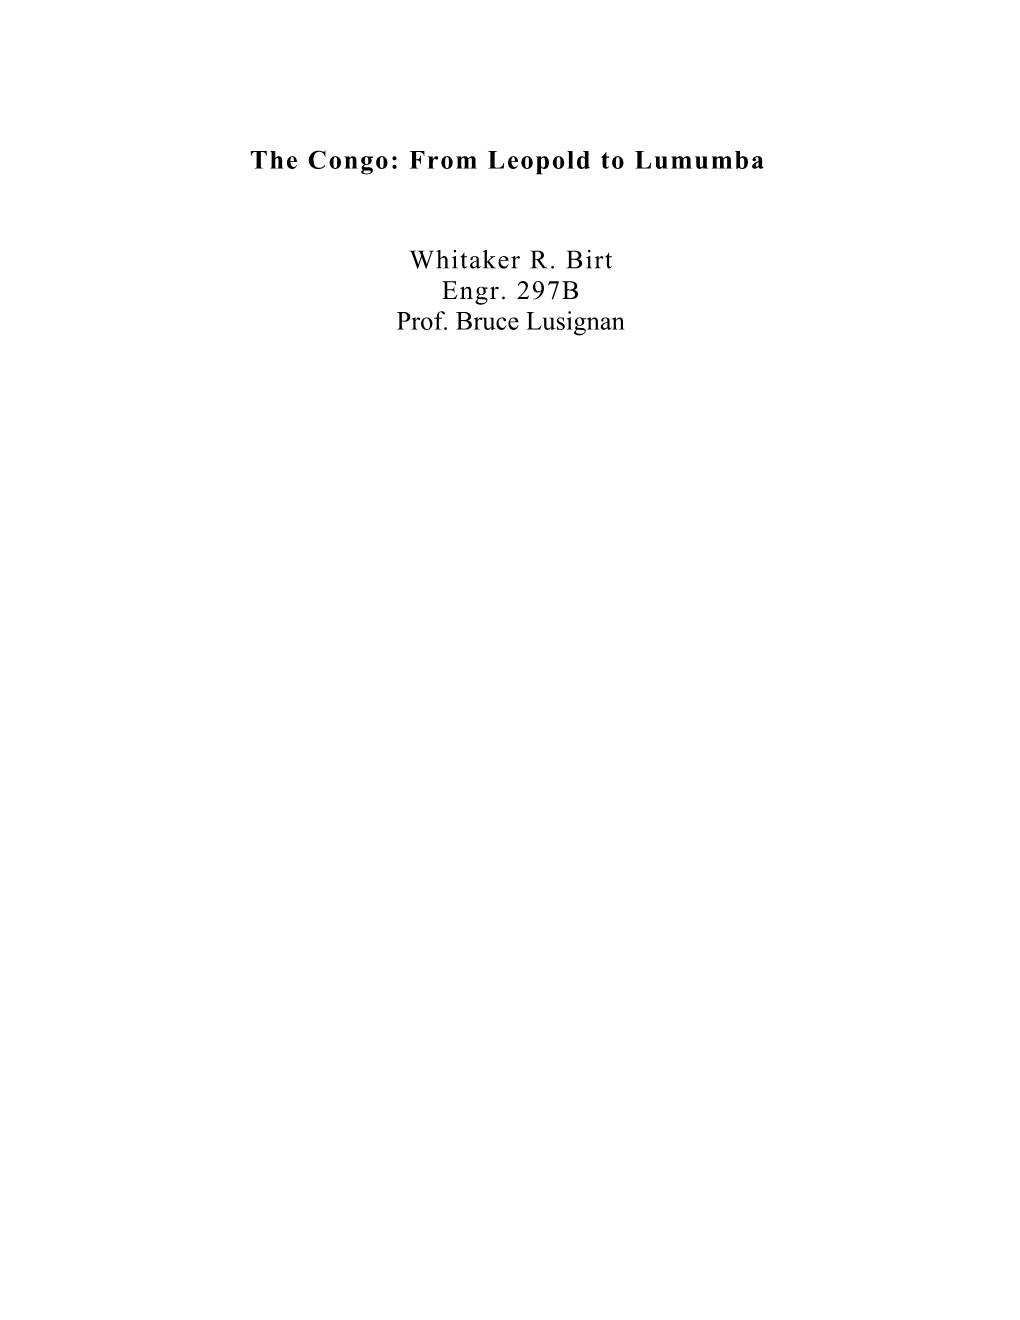 The Congo: from Leopold to Lumumba